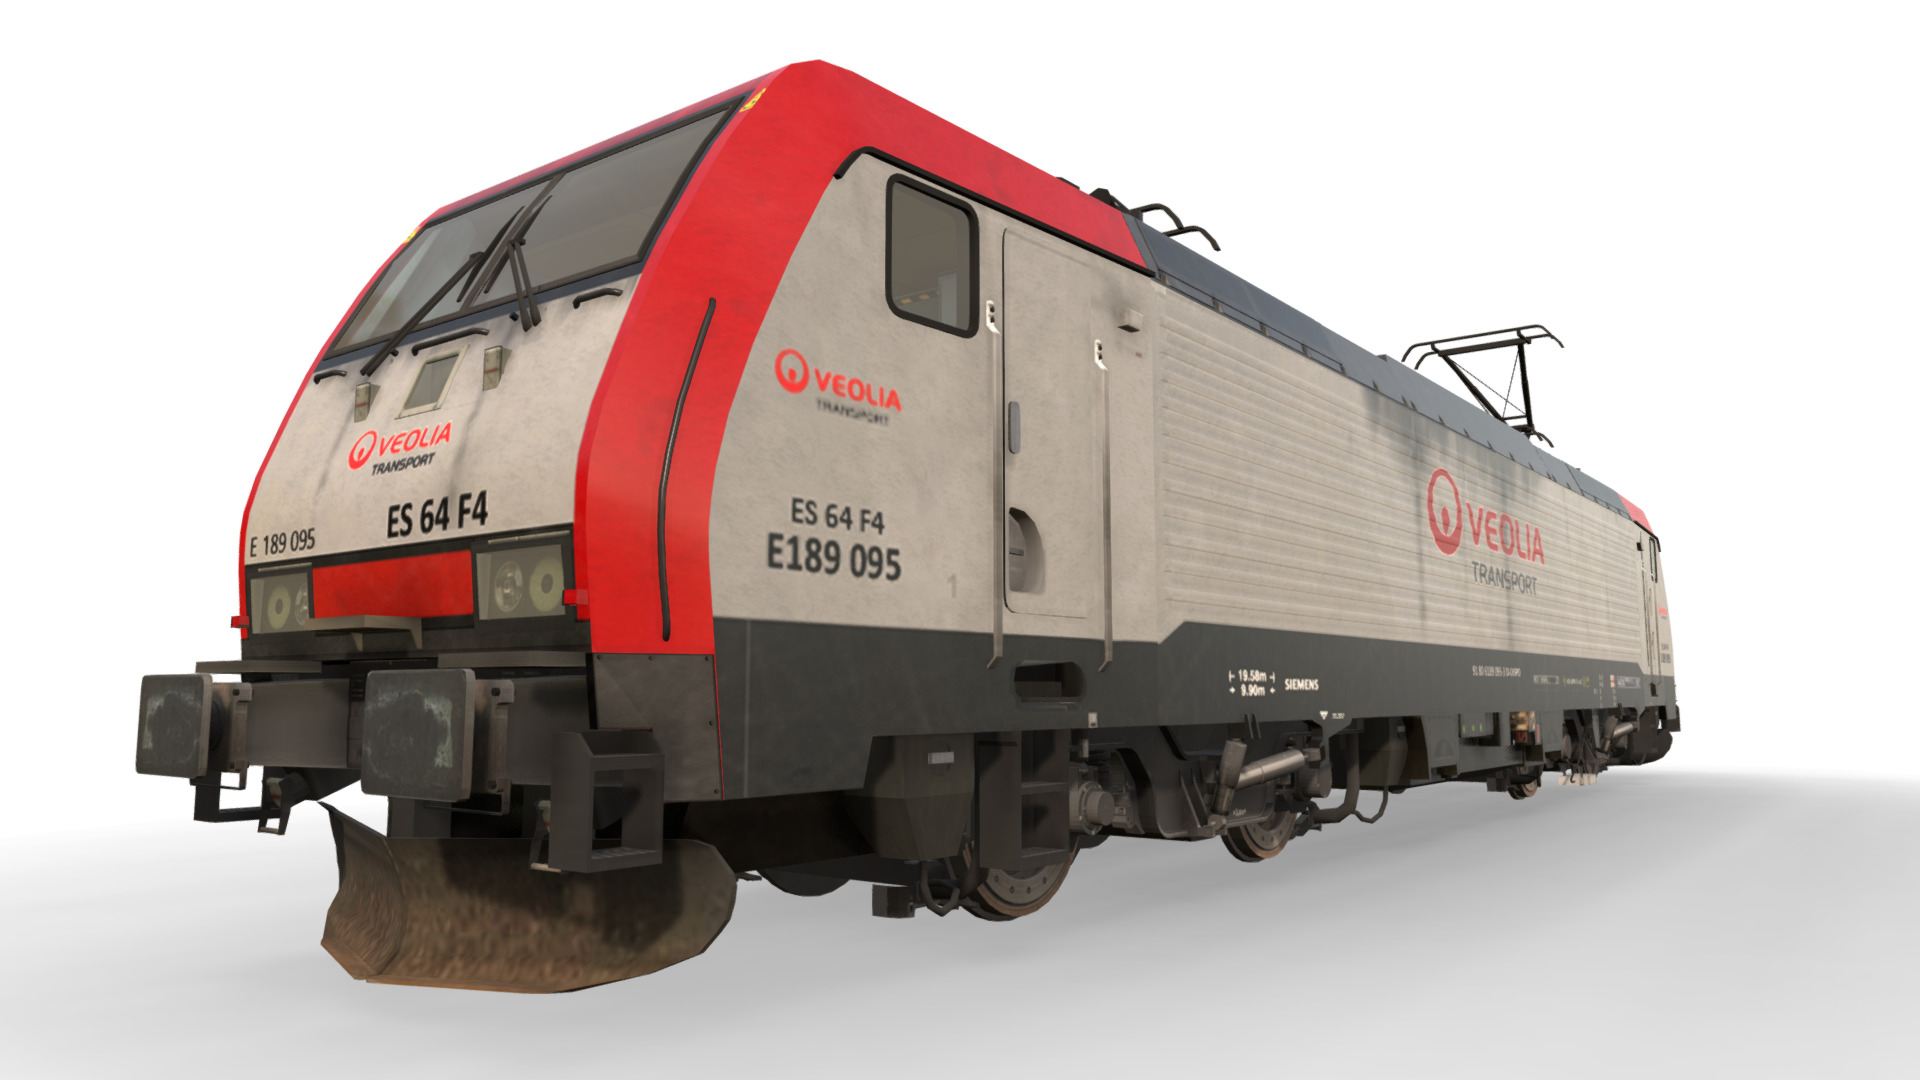 3D model Locomotive Class ES64F4 – 189 095-3 – Veolia - This is a 3D model of the Locomotive Class ES64F4 - 189 095-3 - Veolia. The 3D model is about a silver train on a white background.